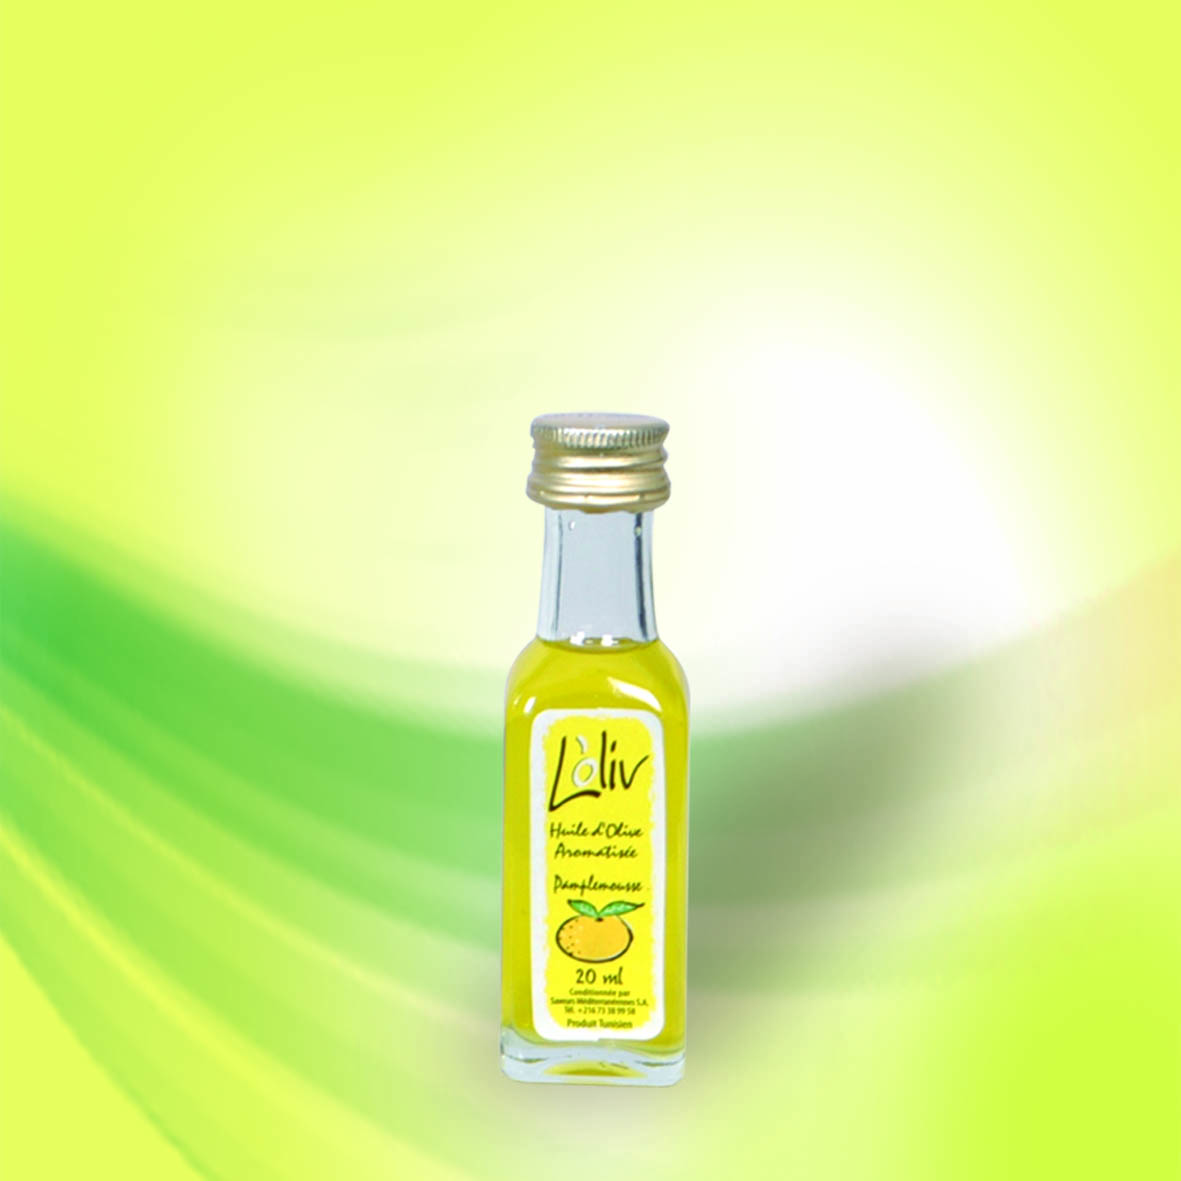 Vente d'huile d'olive aromatise 